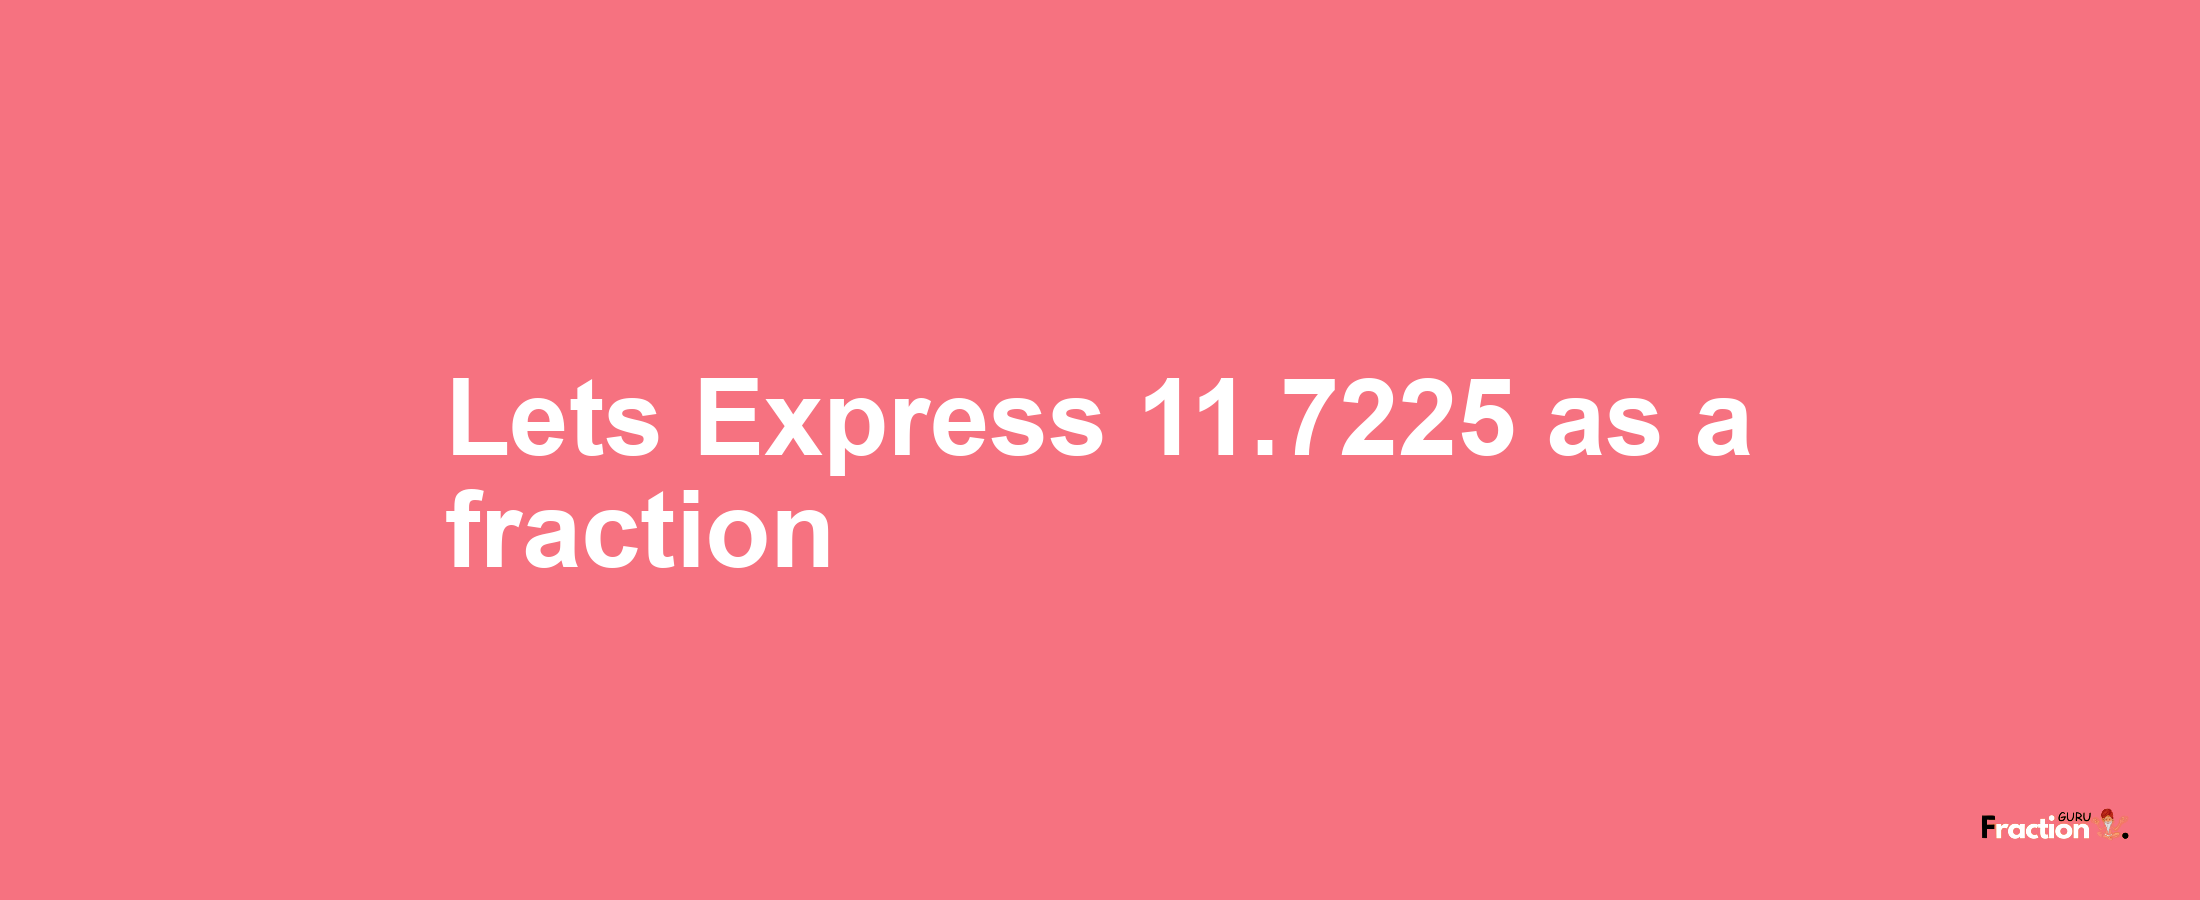 Lets Express 11.7225 as afraction